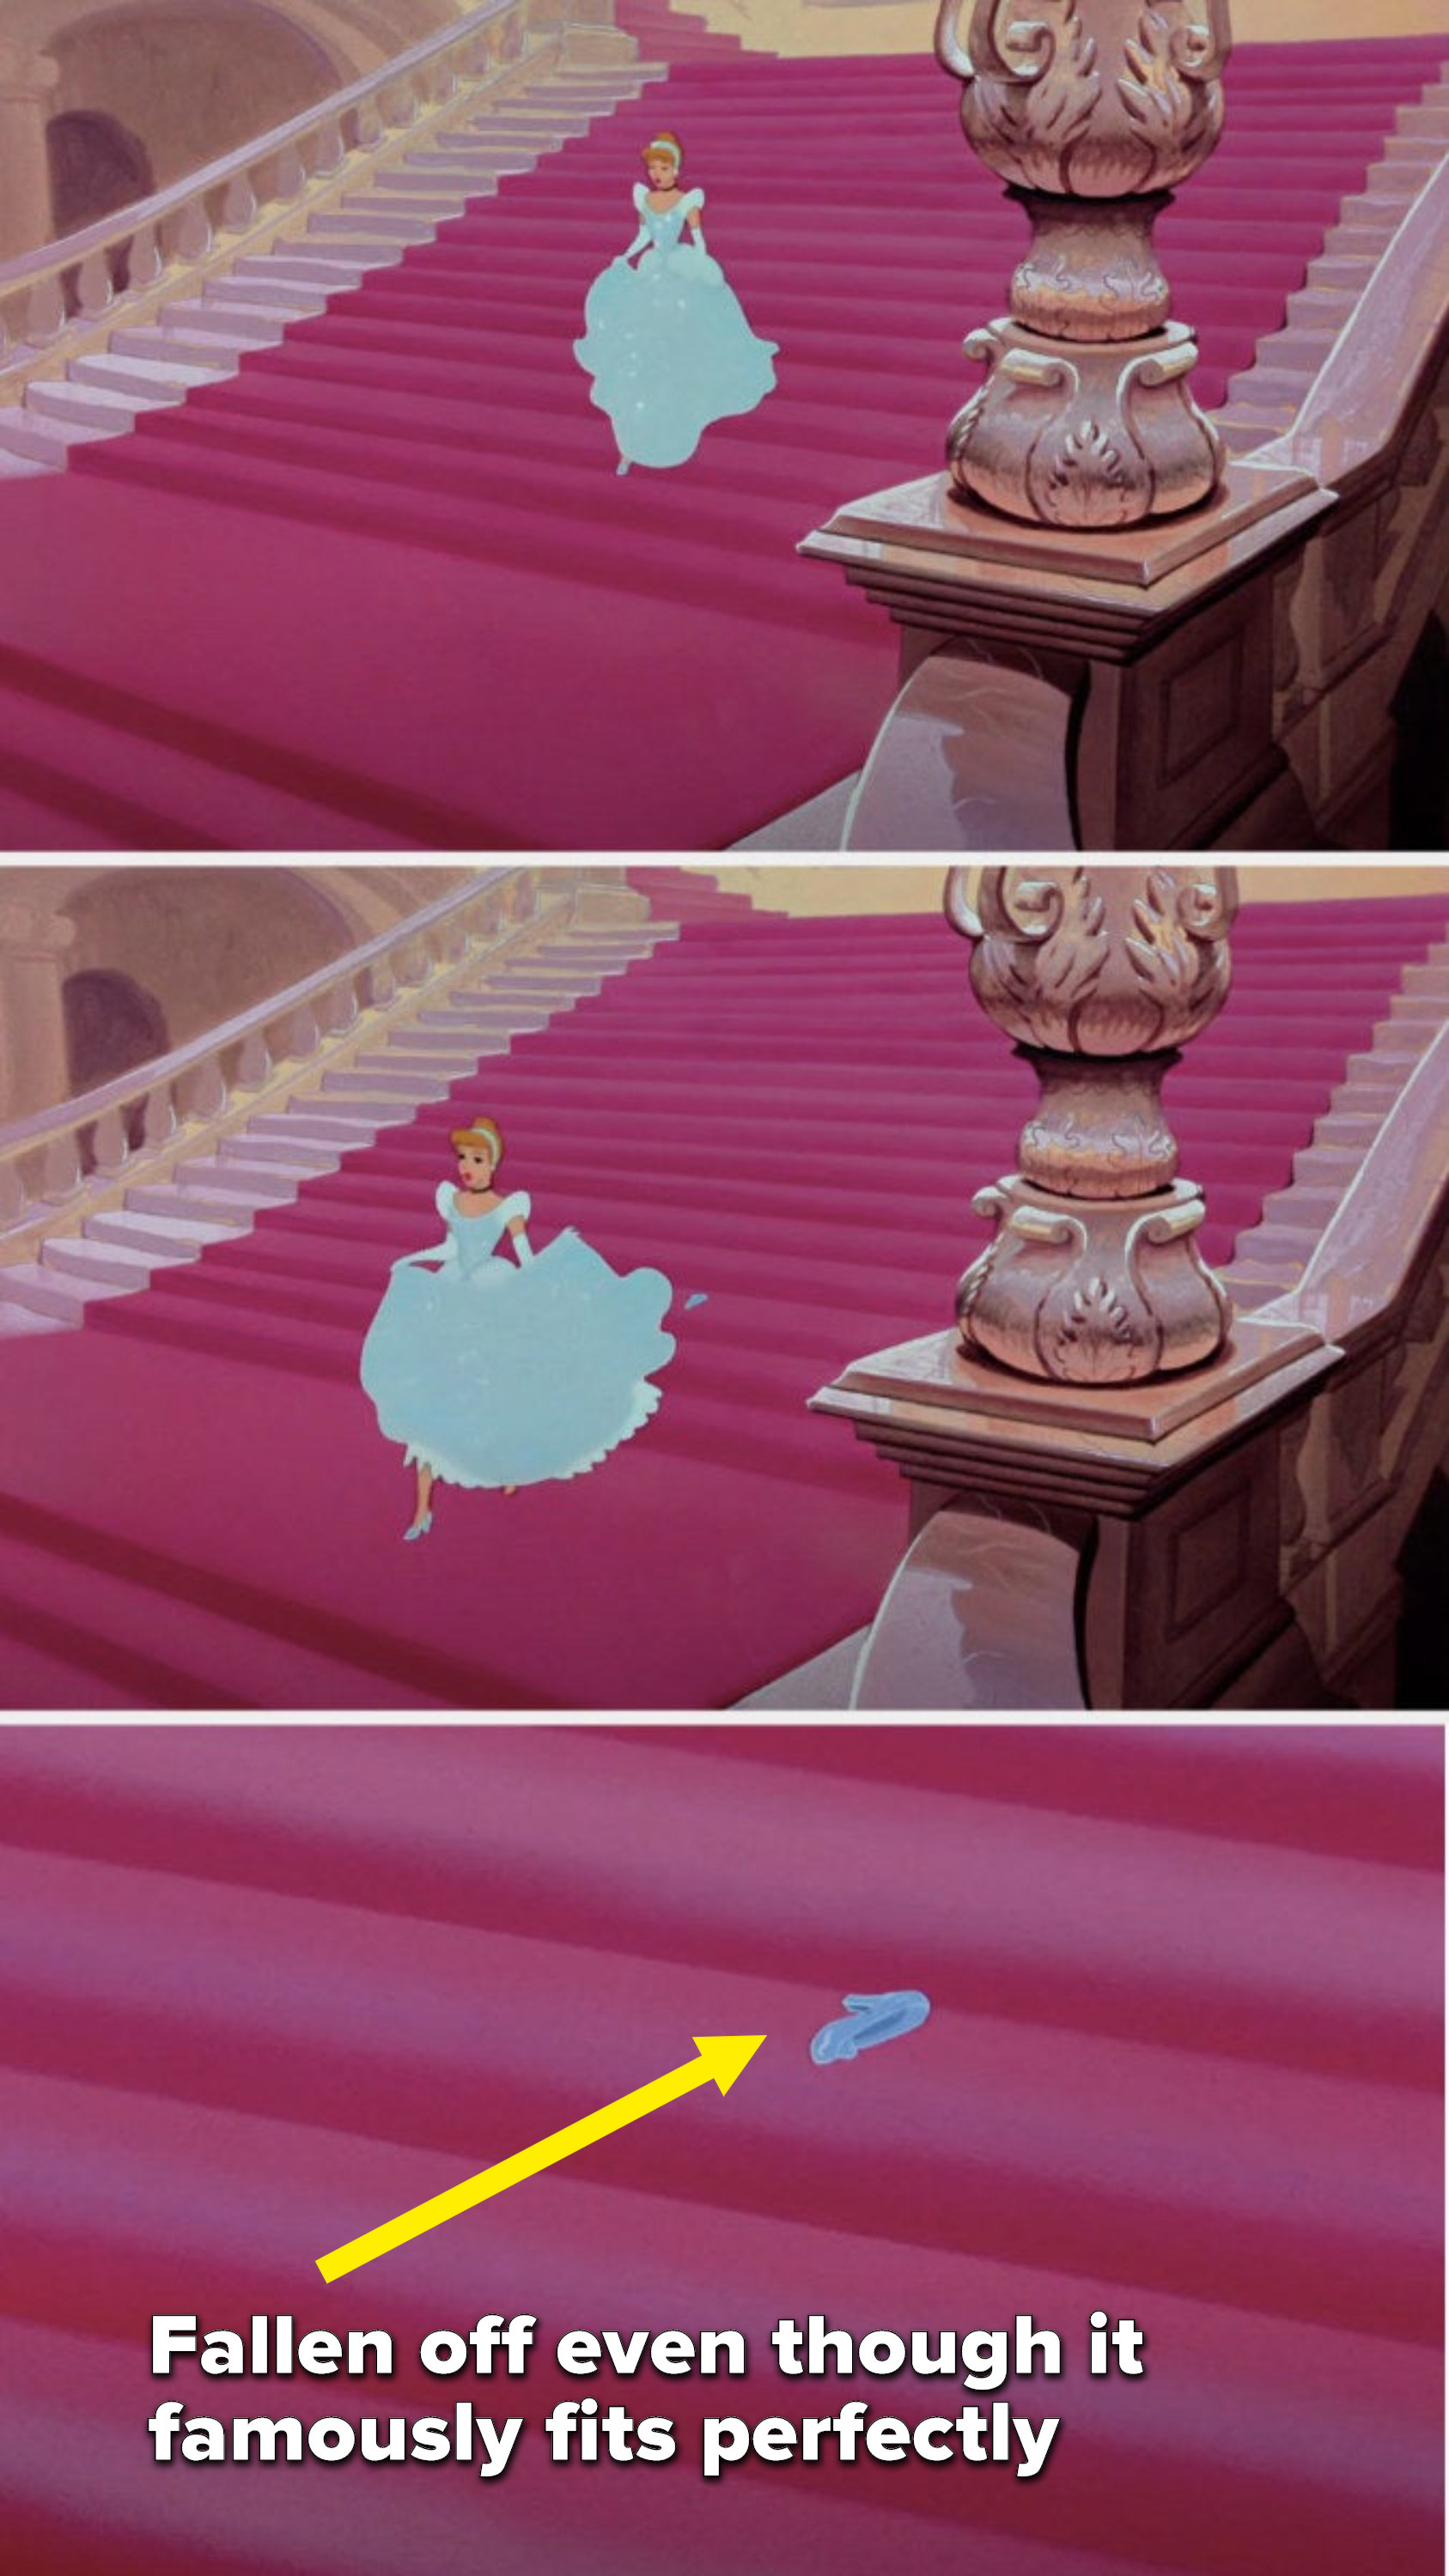 Cinderella runs down the staircase and her glass slipper falls off, even though it famously fits perfectly